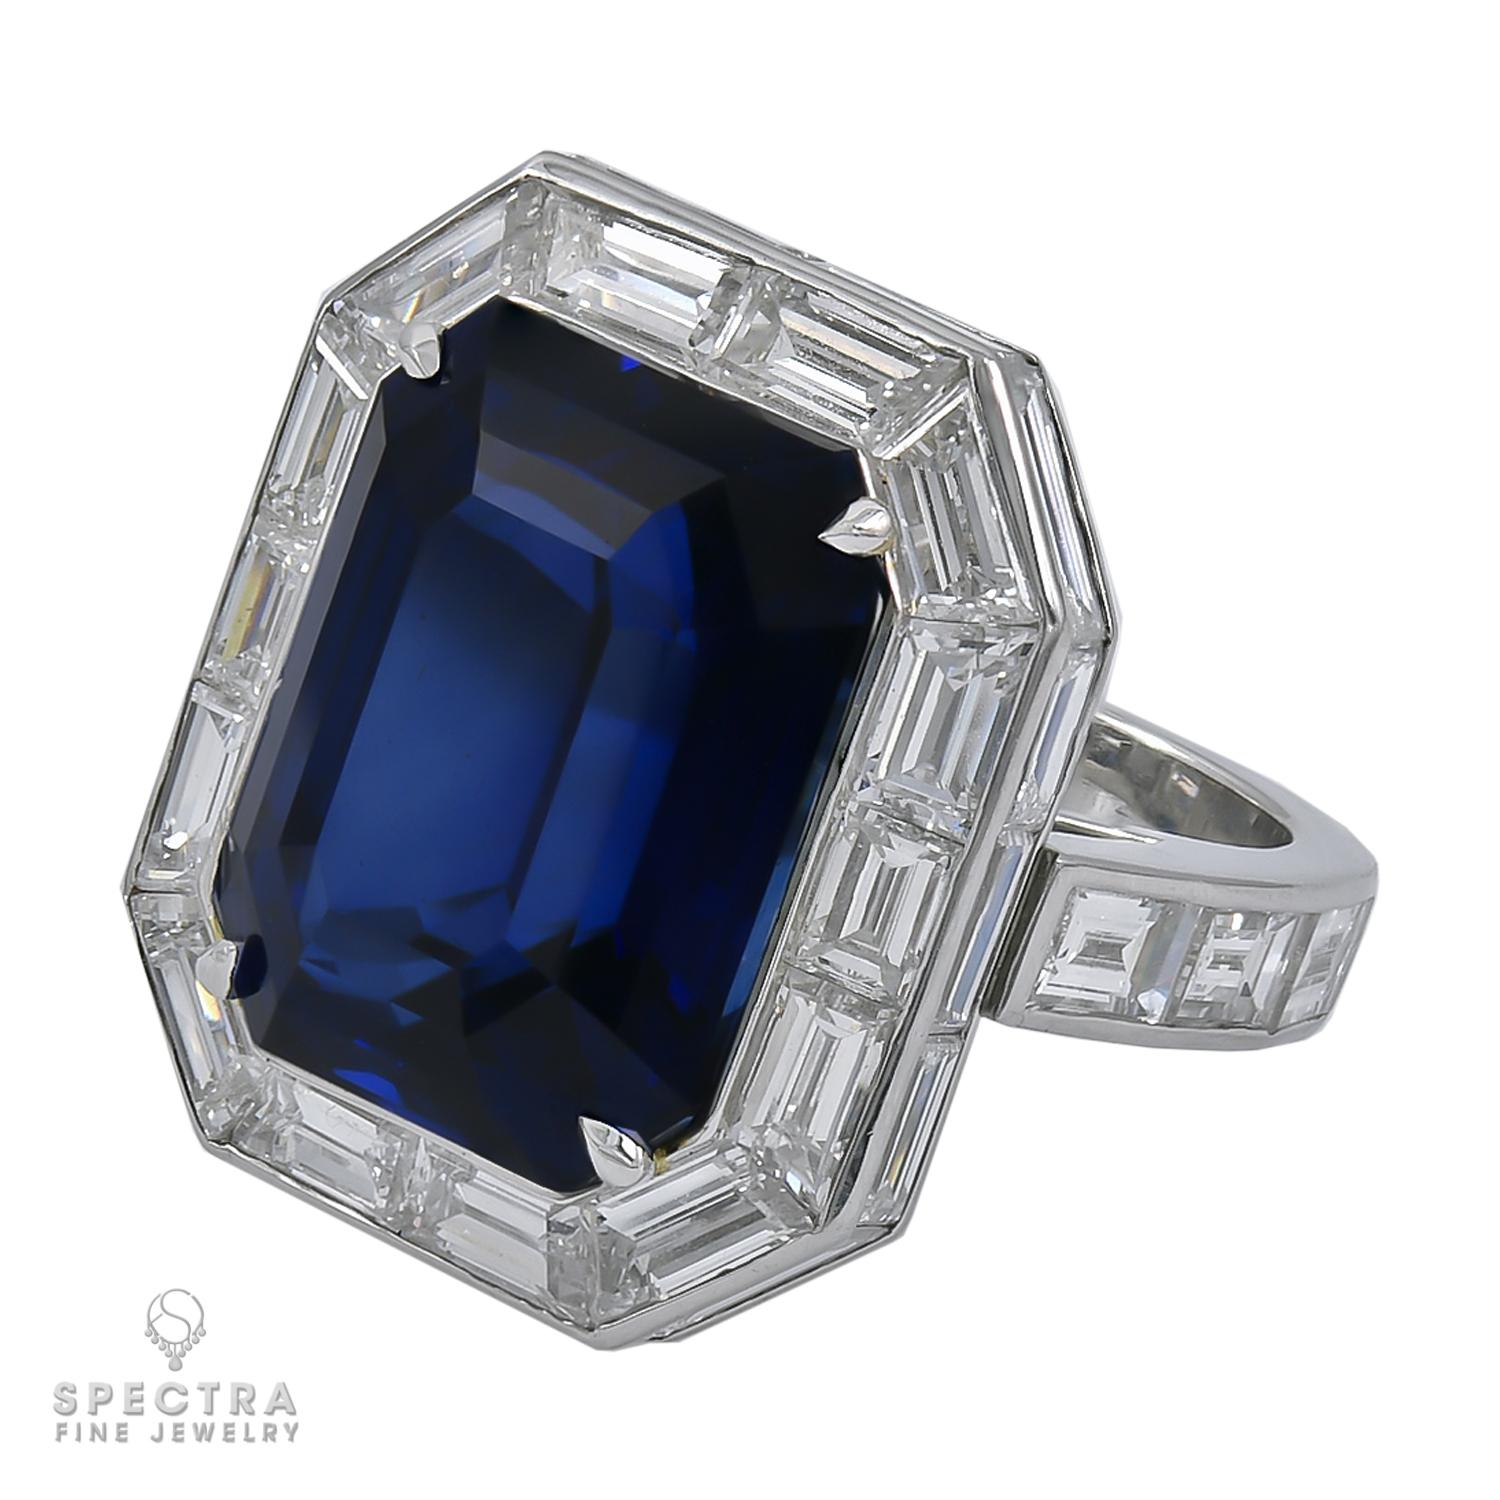 A statement ring featuring a 20.12 carat emerald-cut Royal Blue Sapphire and 34 baguette shape diamonds. 
The sapphire is certified by the Gemresearch Swisslab (GRS) stating that it's of Madagascar origin with indications of heating.
The diamonds